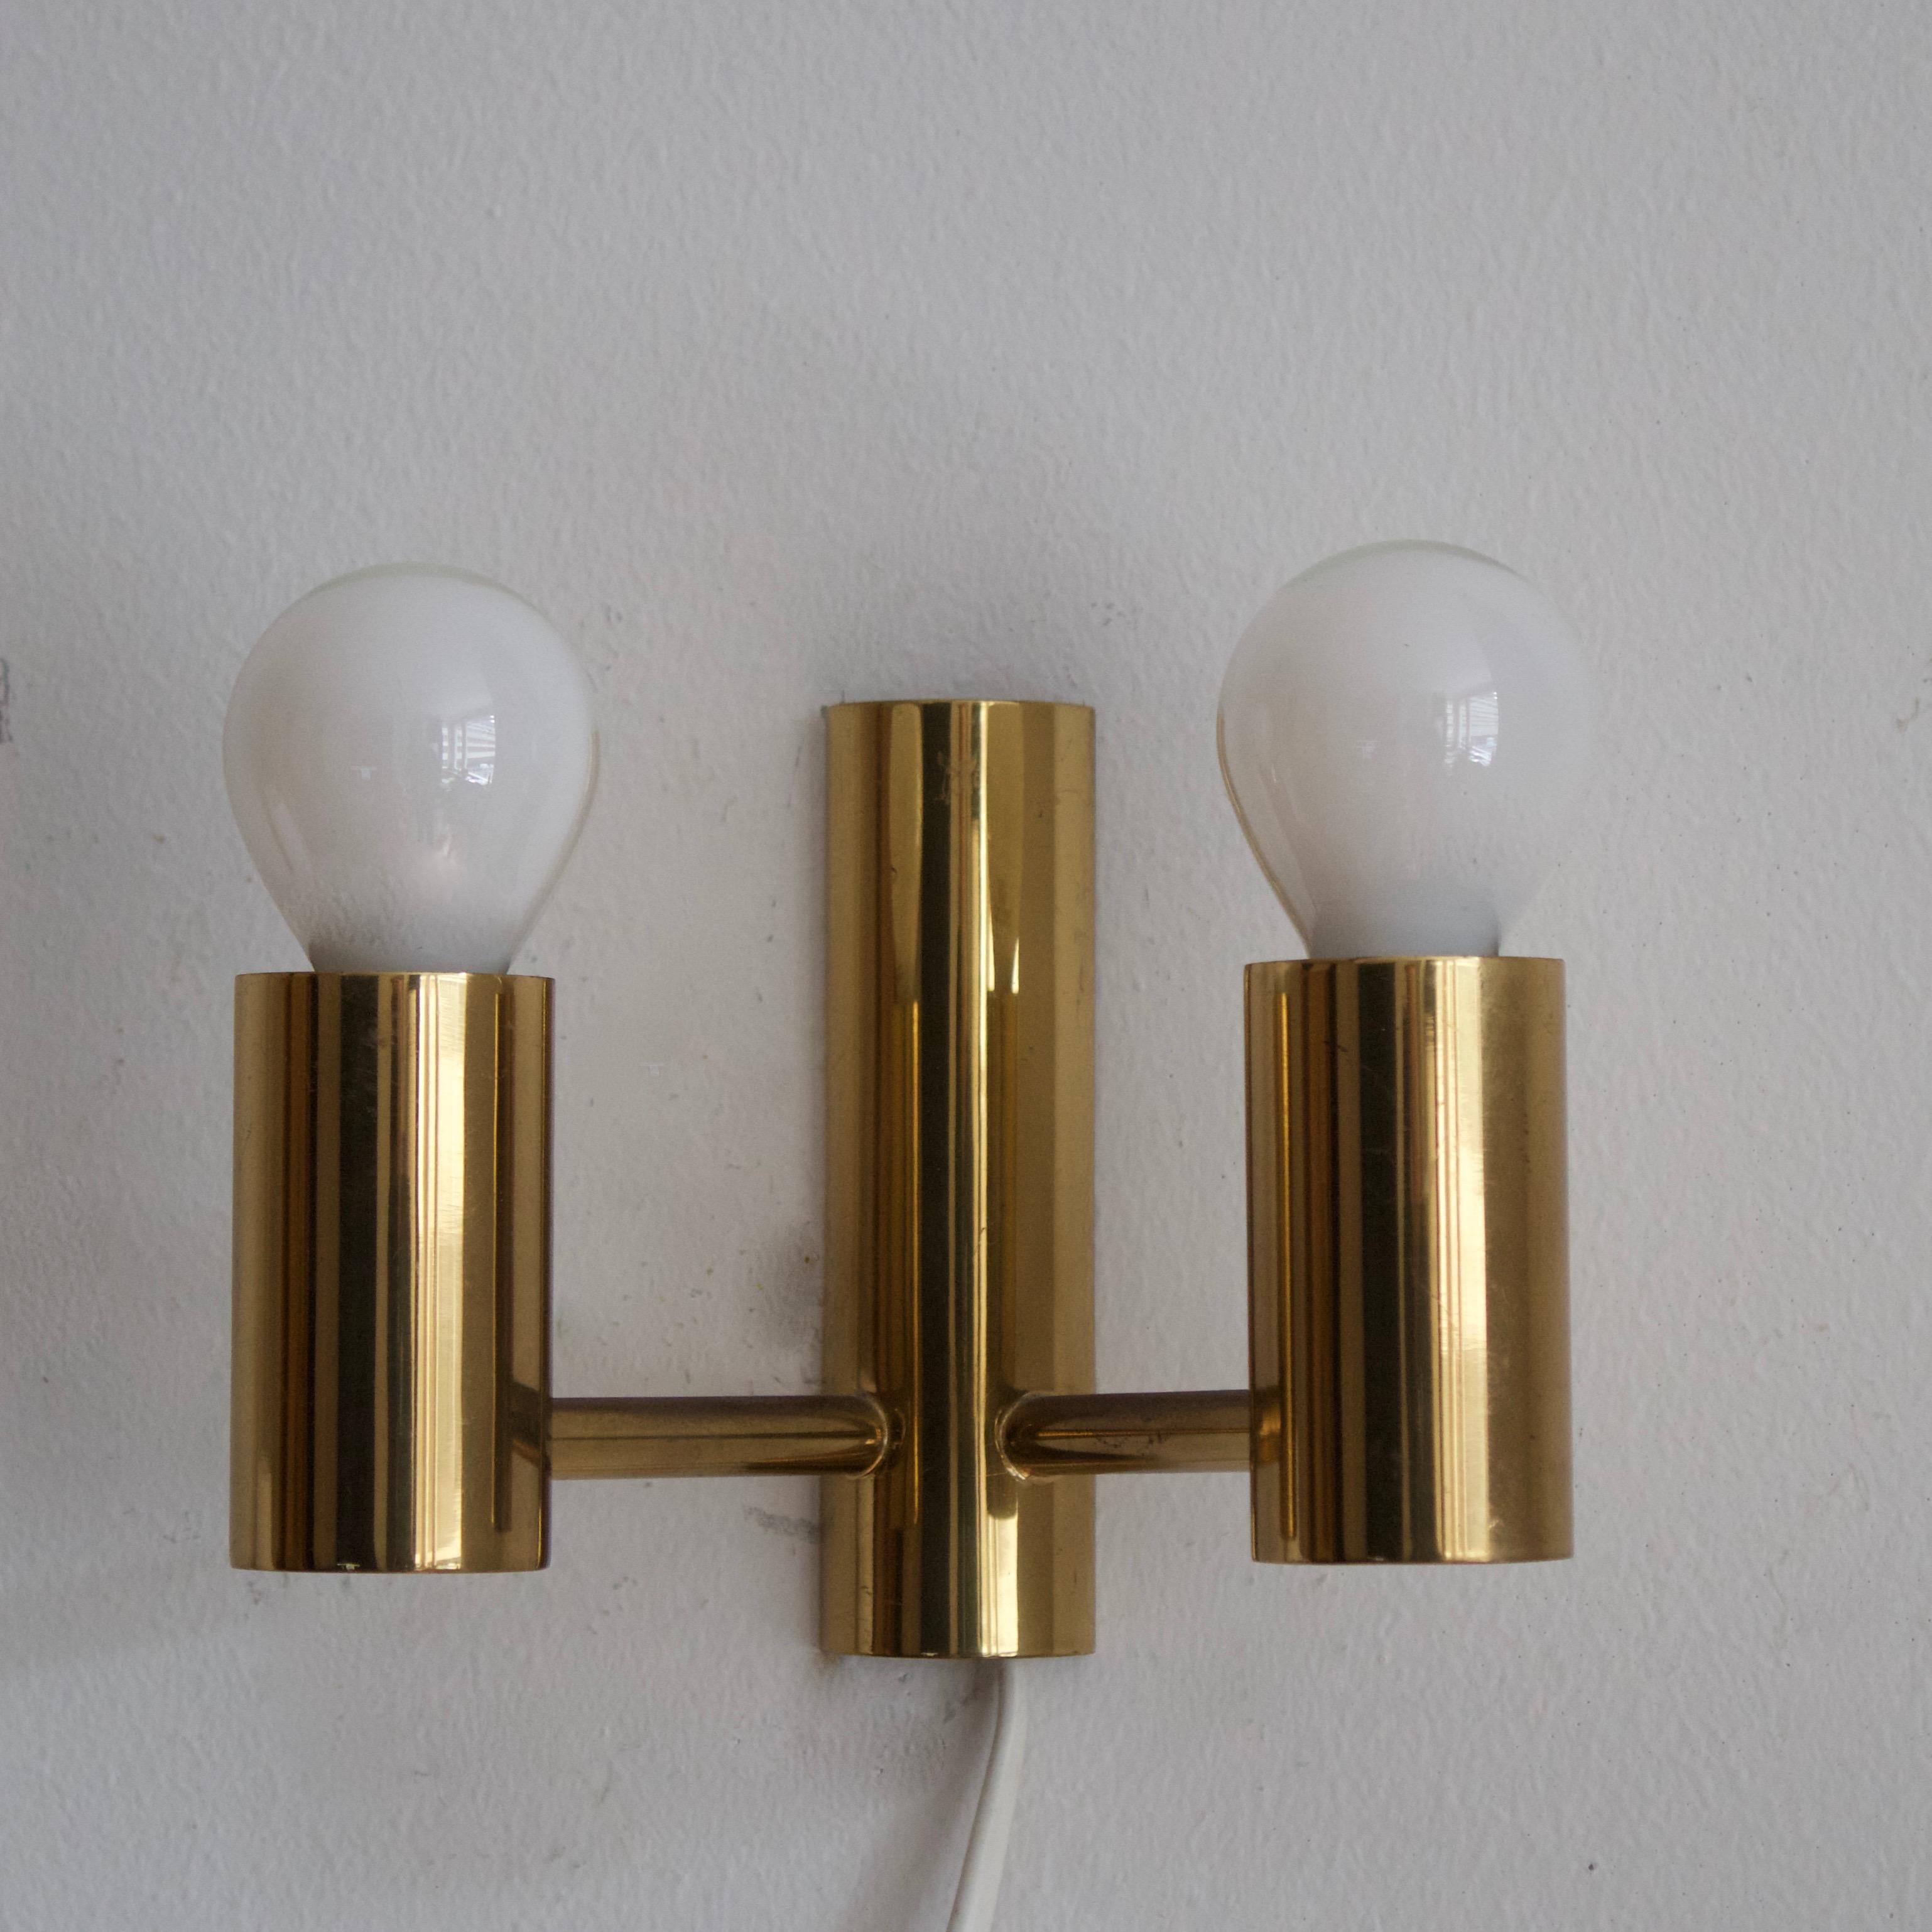 Sven Mejlstrøm, Two-armed Wall Lights, Brass, Fabric, Denmark, 1960s In Good Condition For Sale In High Point, NC